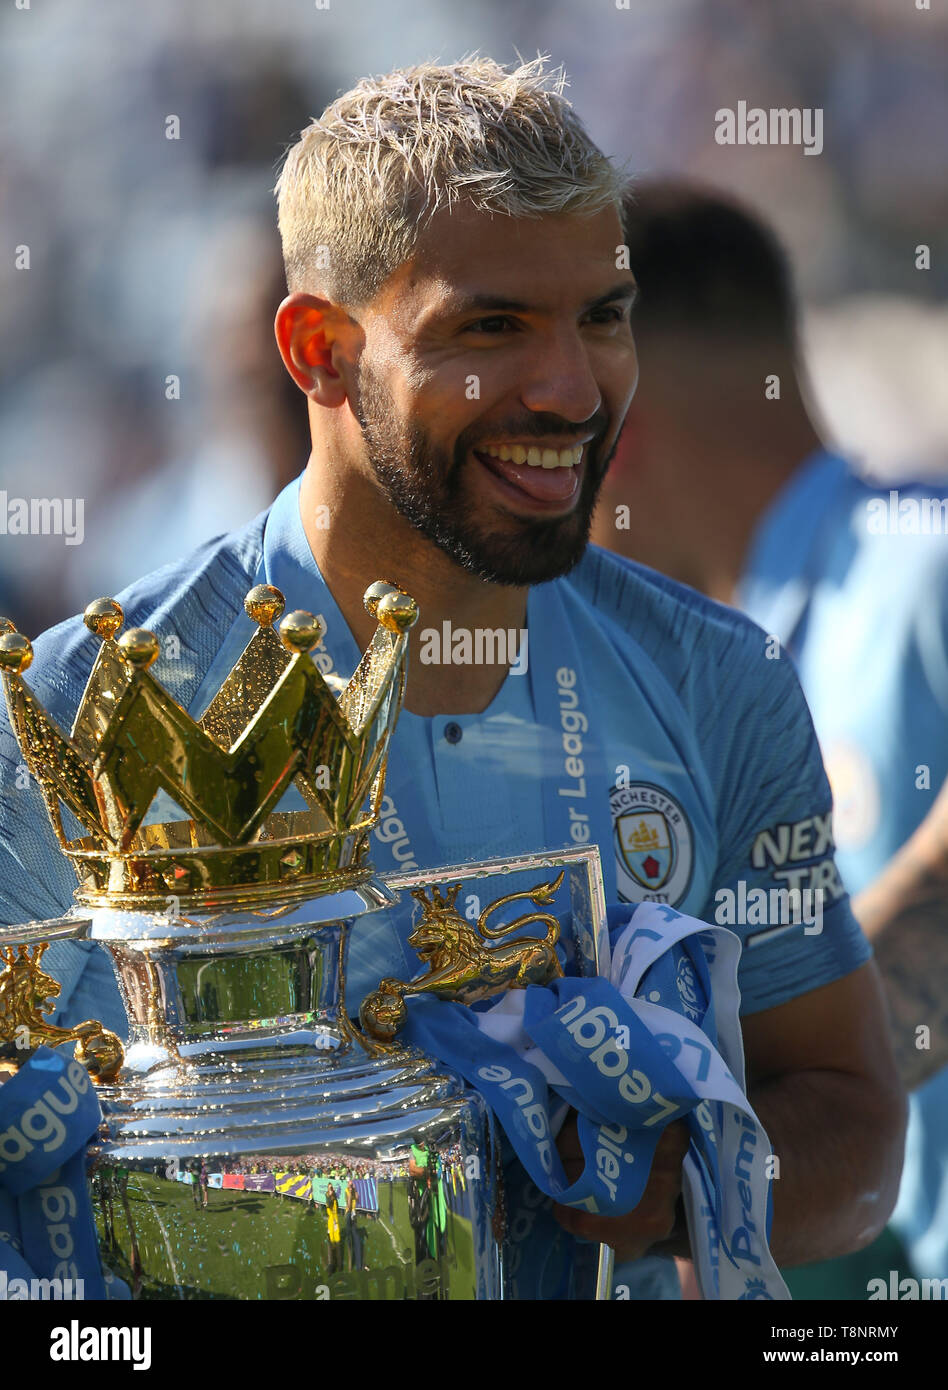 Manchester Citys Sergio Aguero with the Premier League Trophy during the English Premier League soccer match between Brighton Hove Albion and Manchester City at the Amex Stadium in Brighton